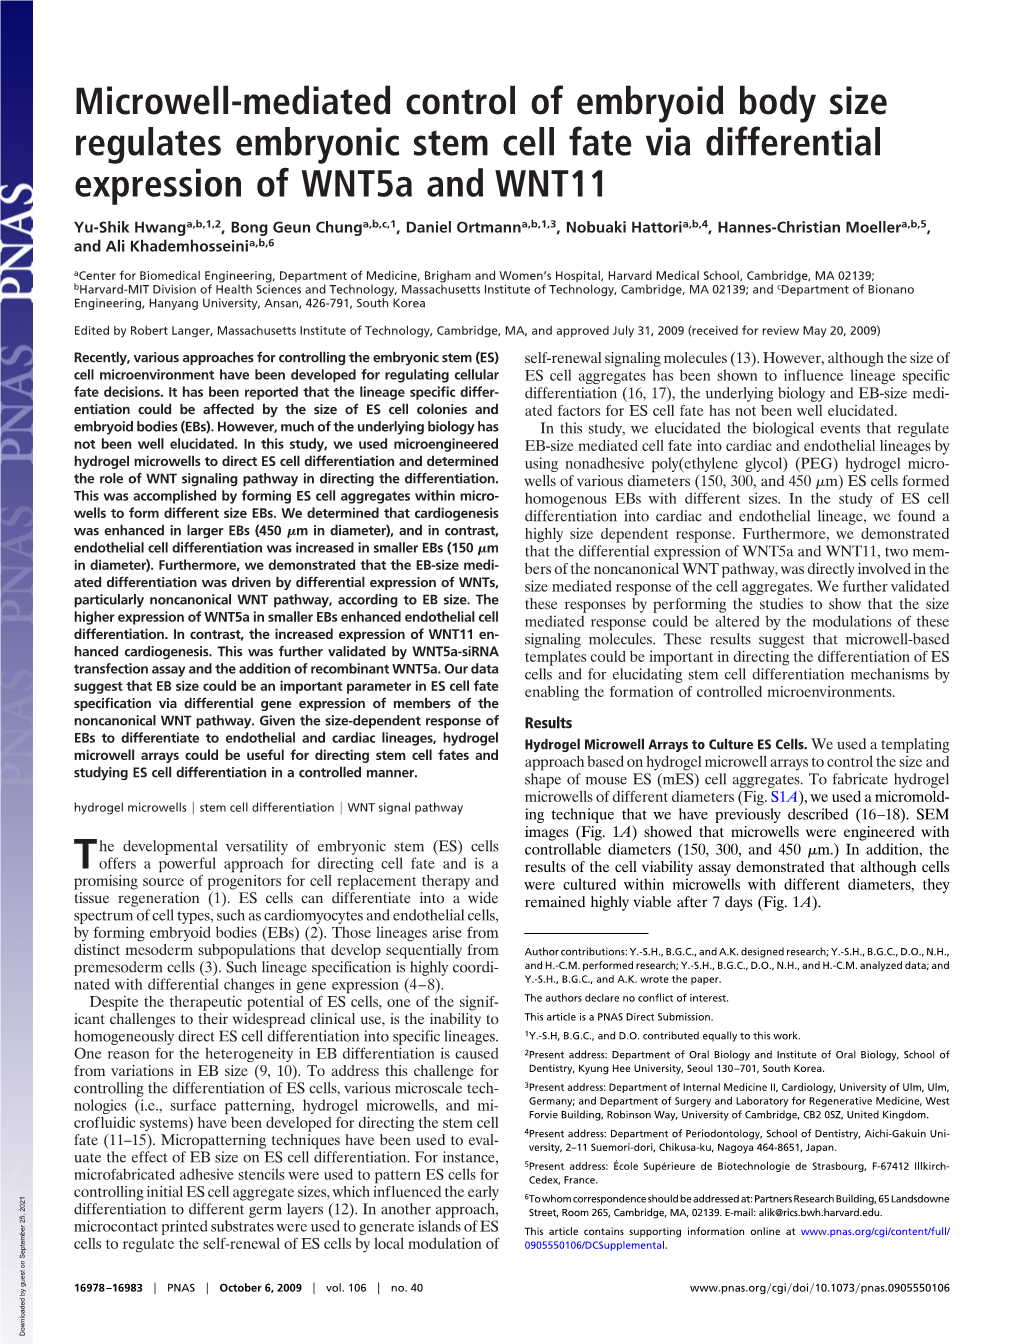 Microwell-Mediated Control of Embryoid Body Size Regulates Embryonic Stem Cell Fate Via Differential Expression of Wnt5a and WNT11